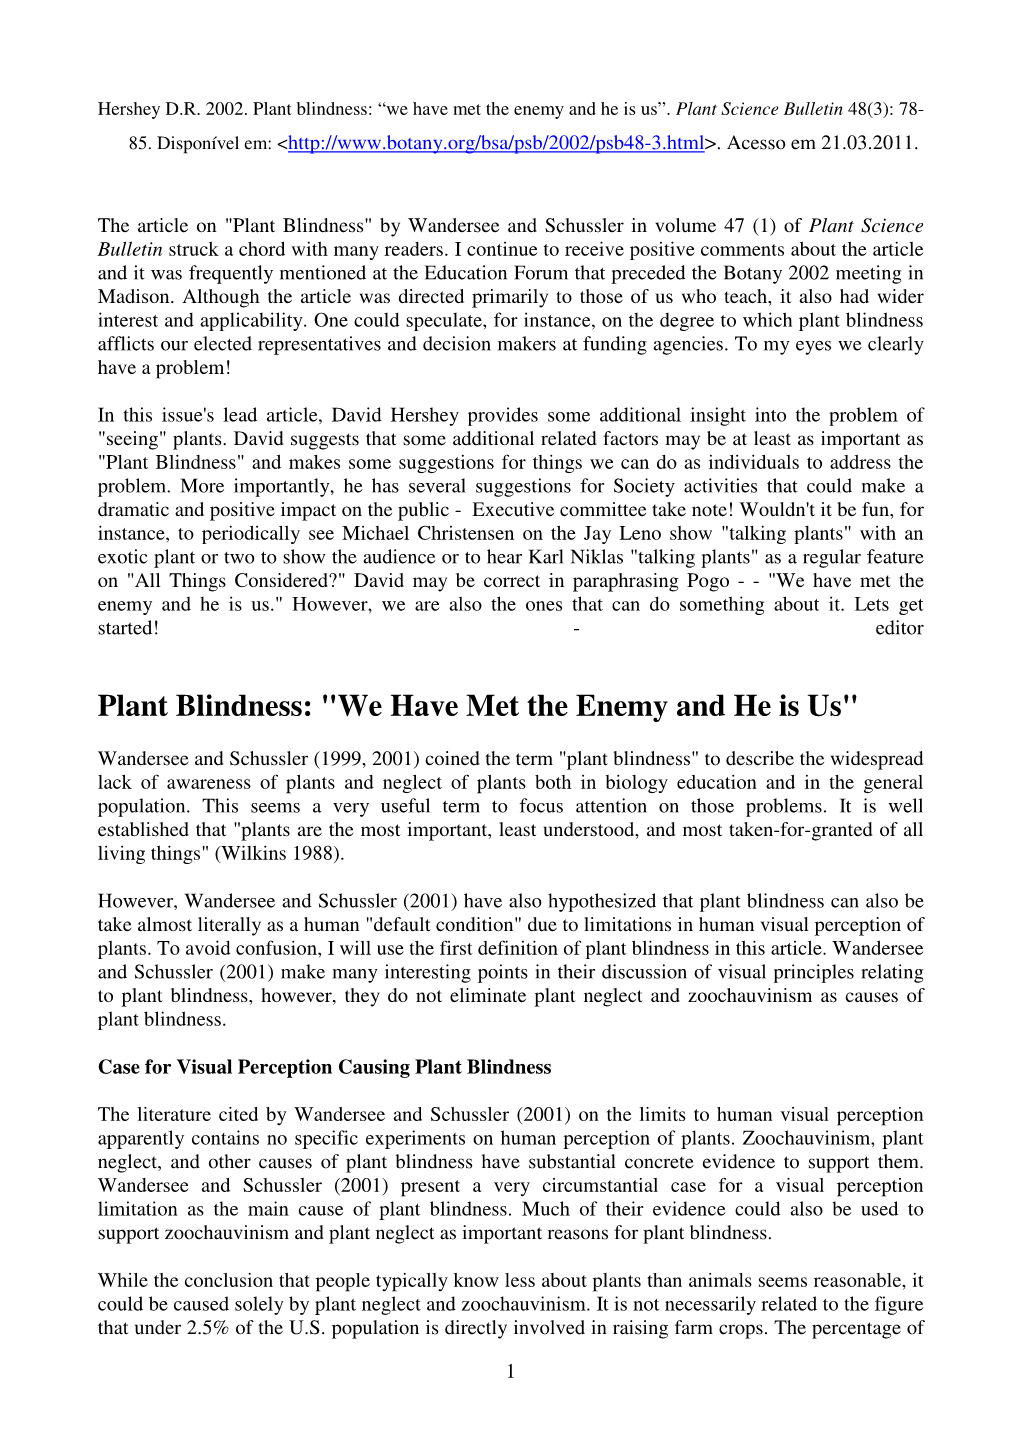 Plant Blindness: "We Have Met the Enemy and He Is Us"